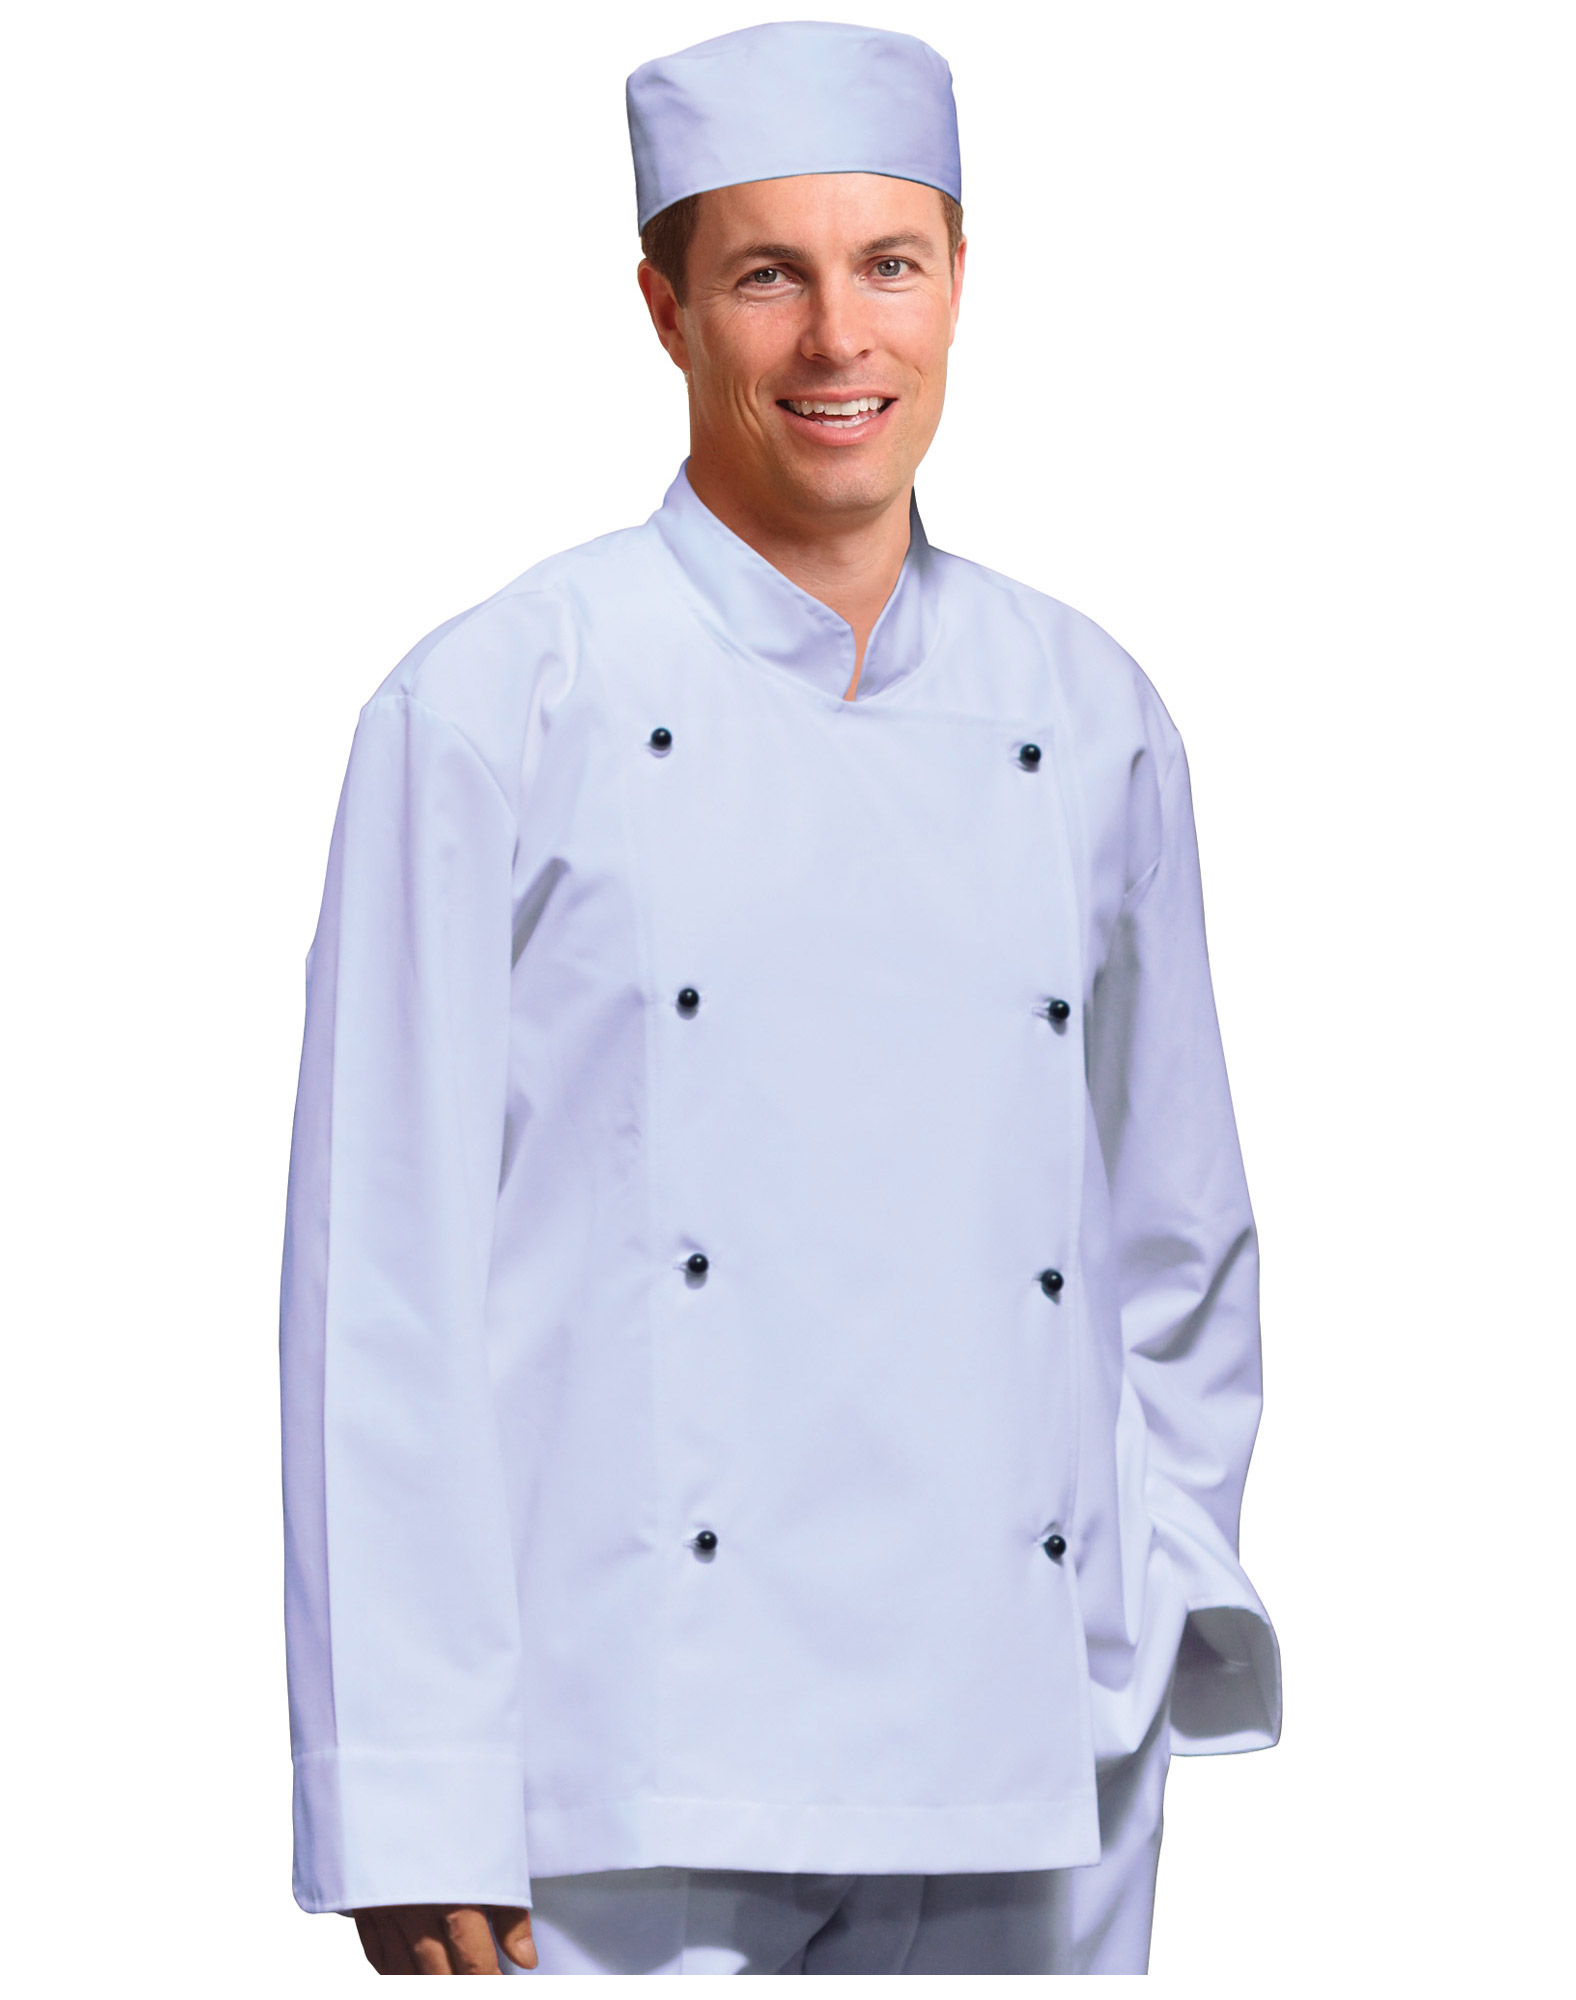 Traditional Chef Whites